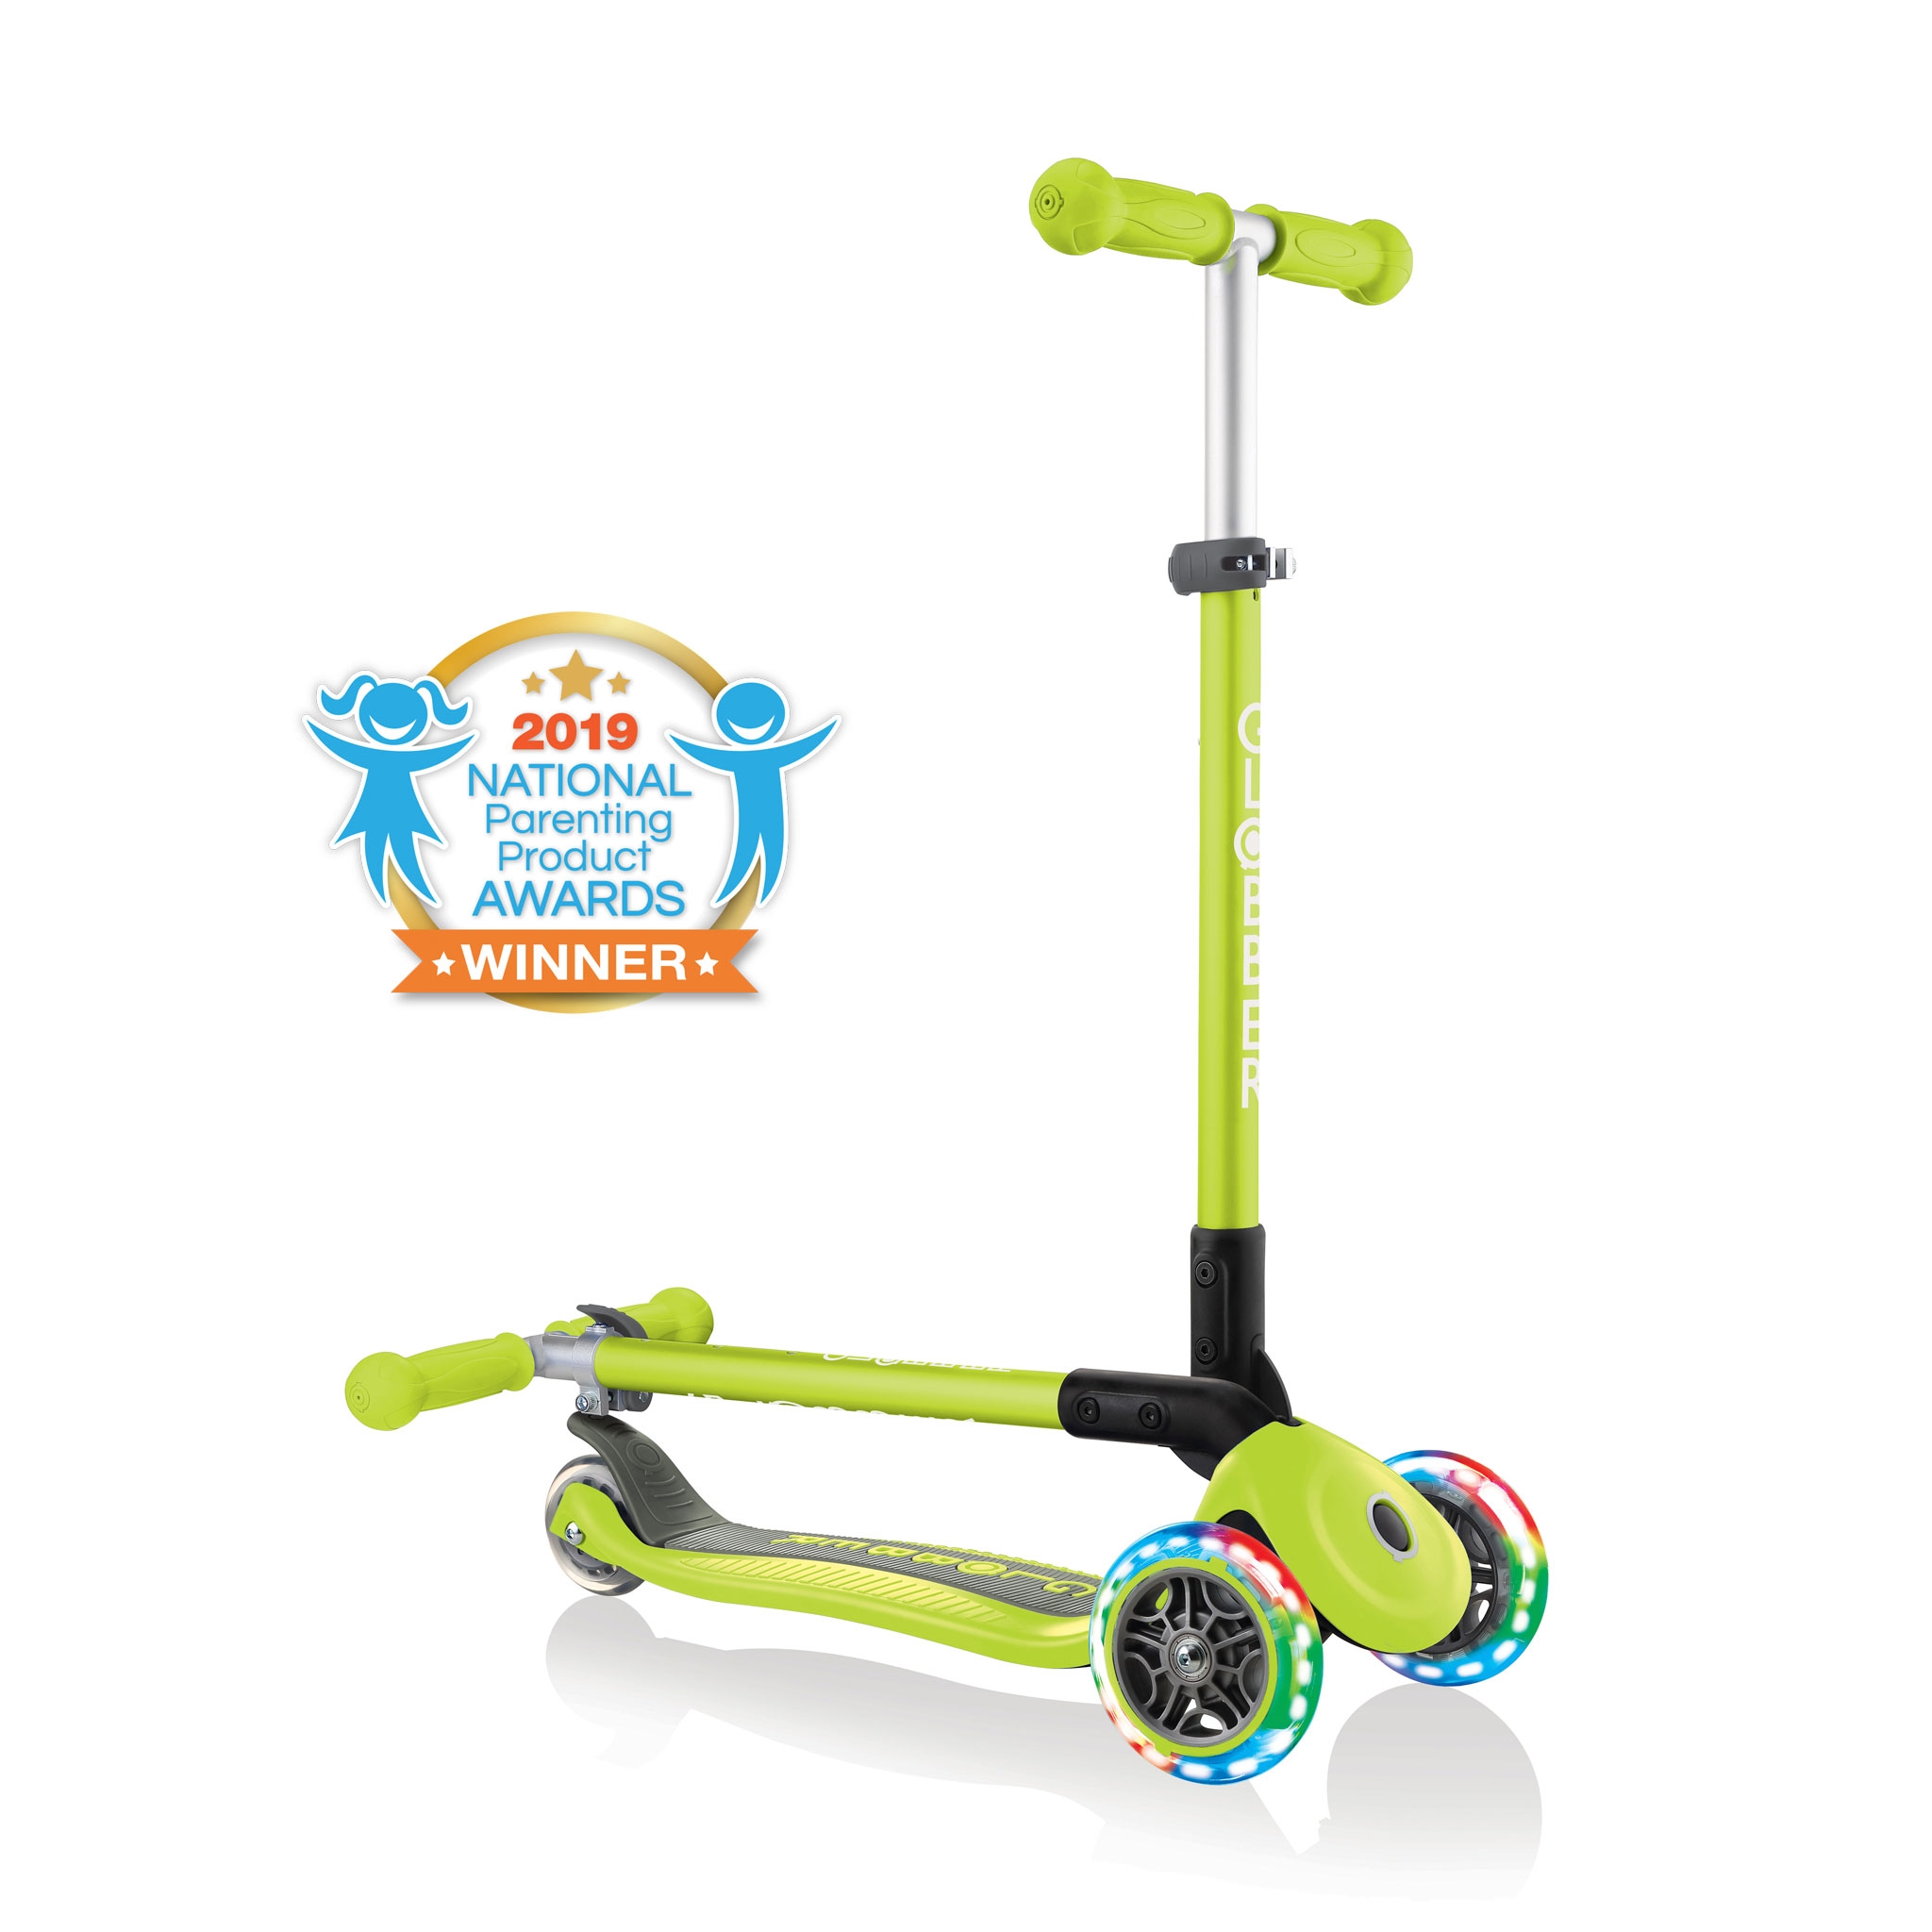 PRIMO-FOLDABLE-LIGHTS-3-wheel-fold-up-scooter-for-kids-lime-green2 0